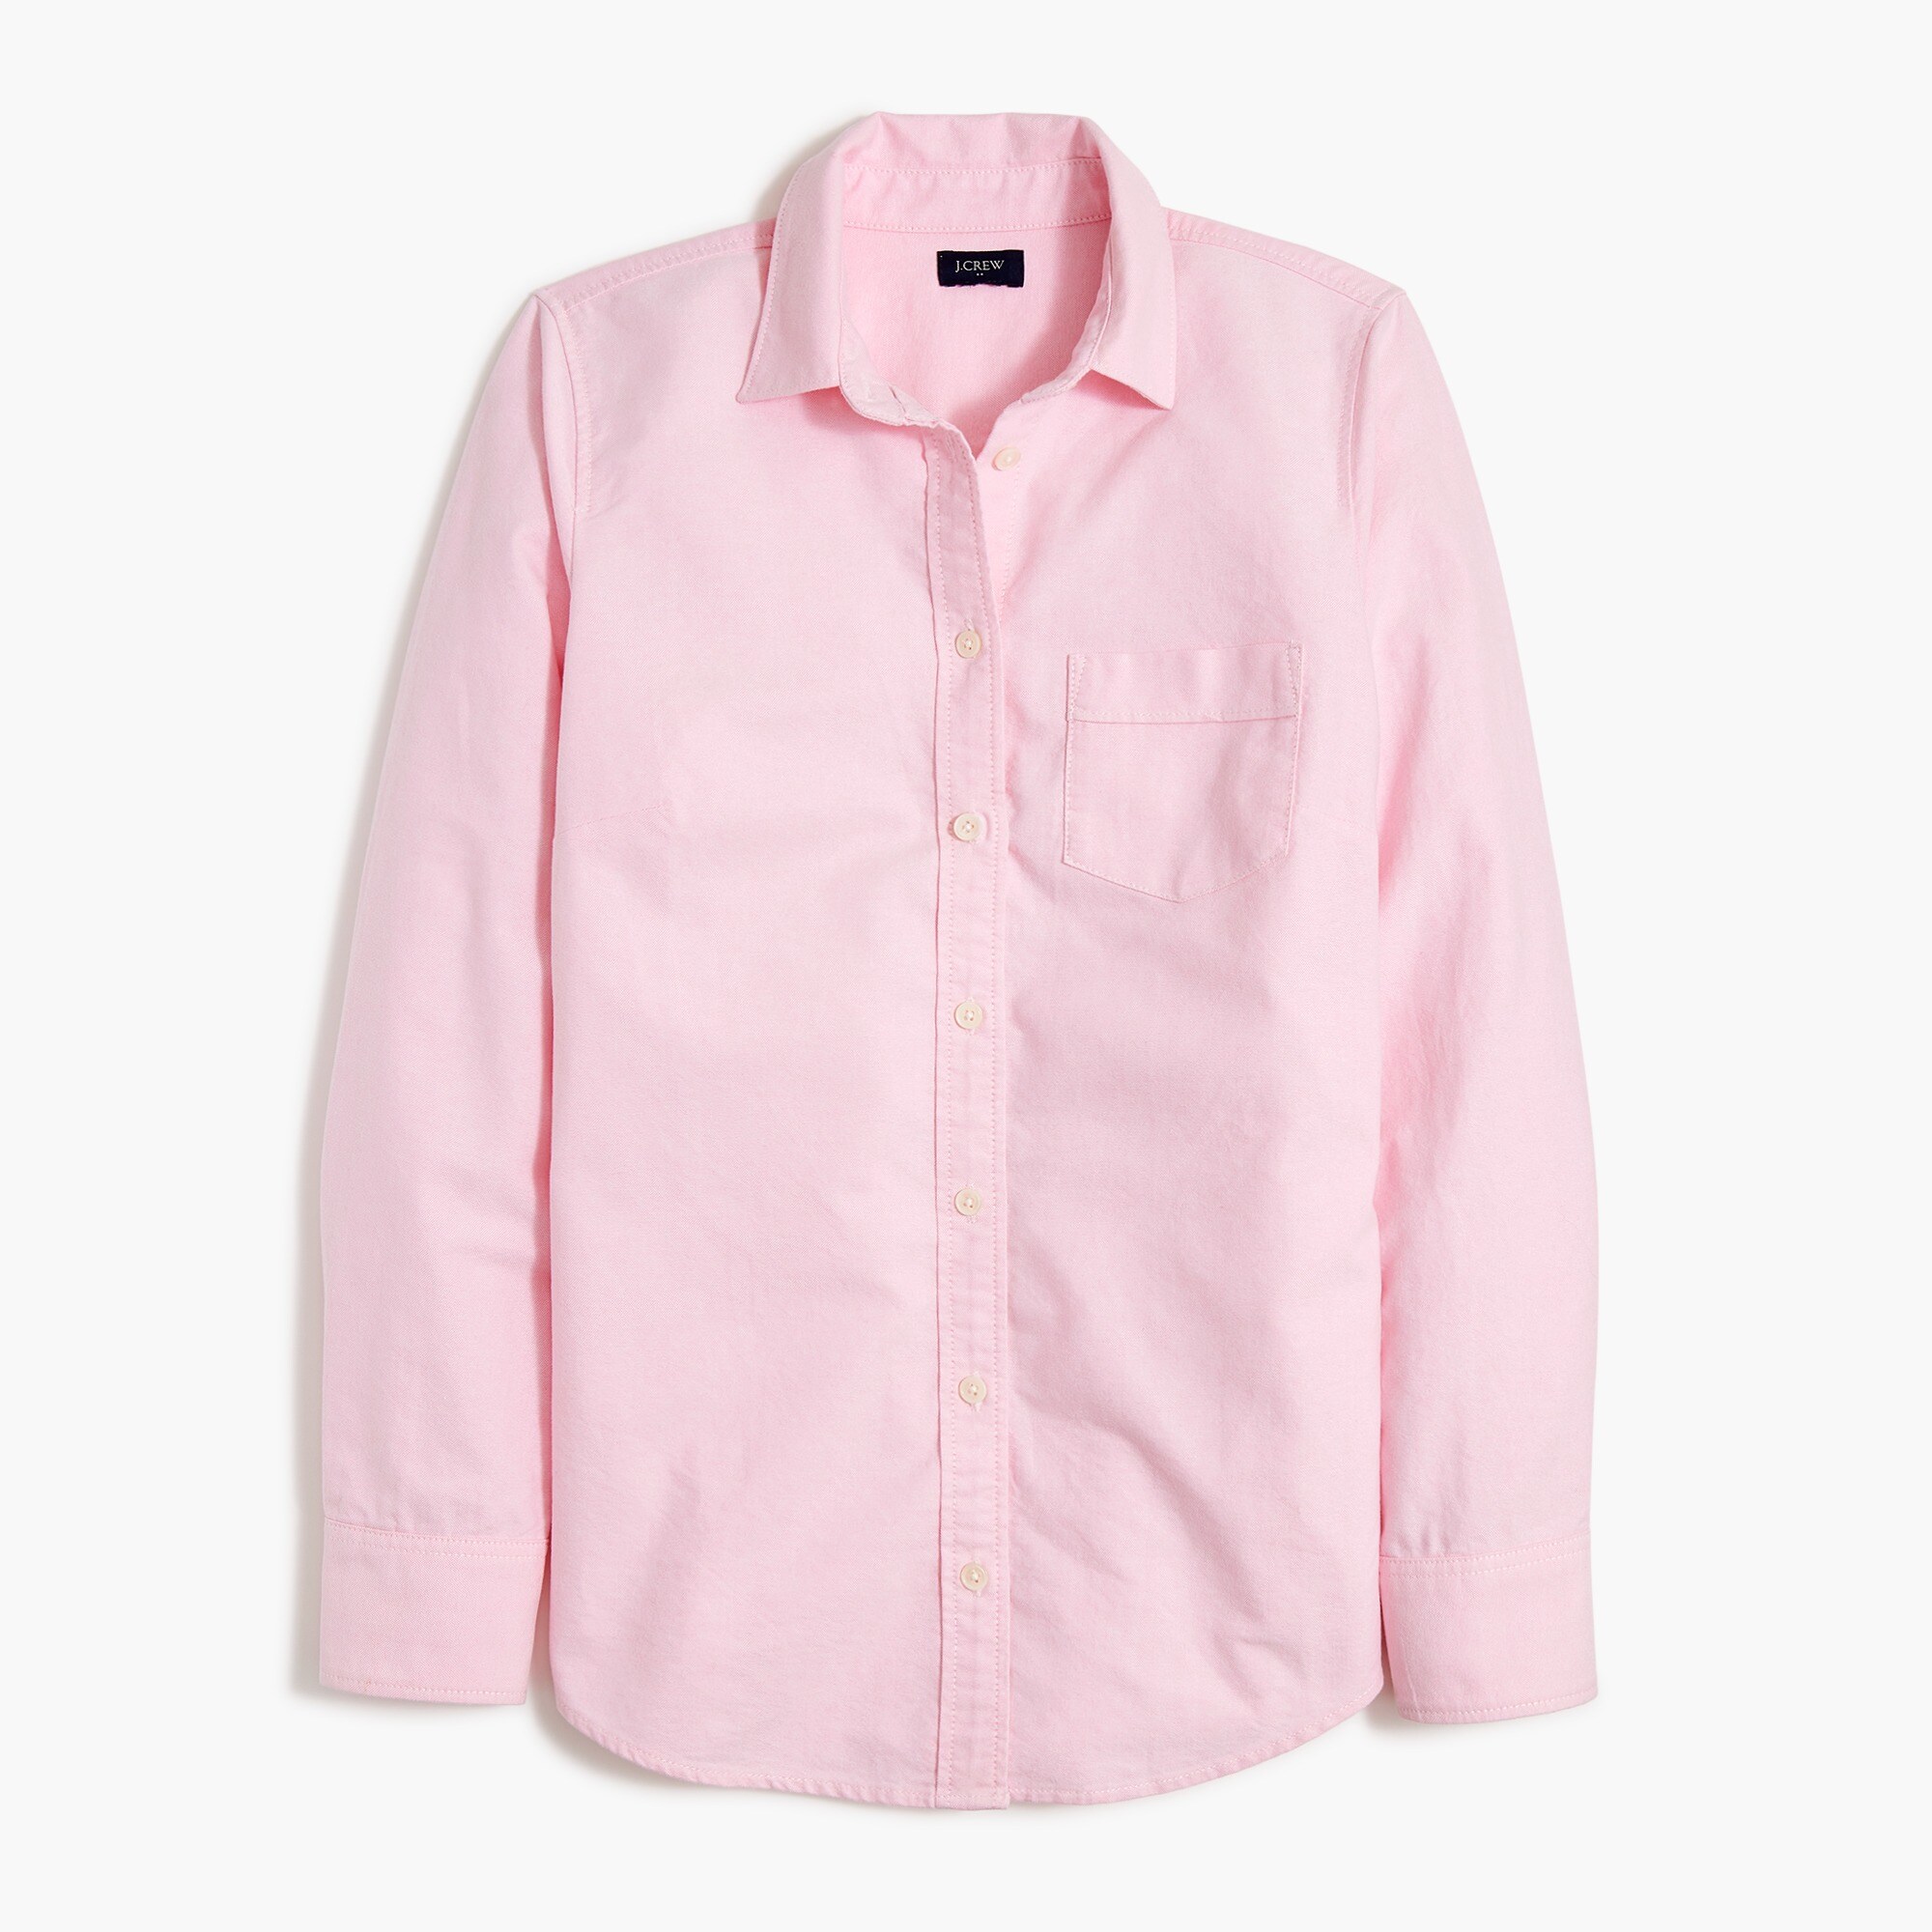  Button-up oxford shirt in signature fit